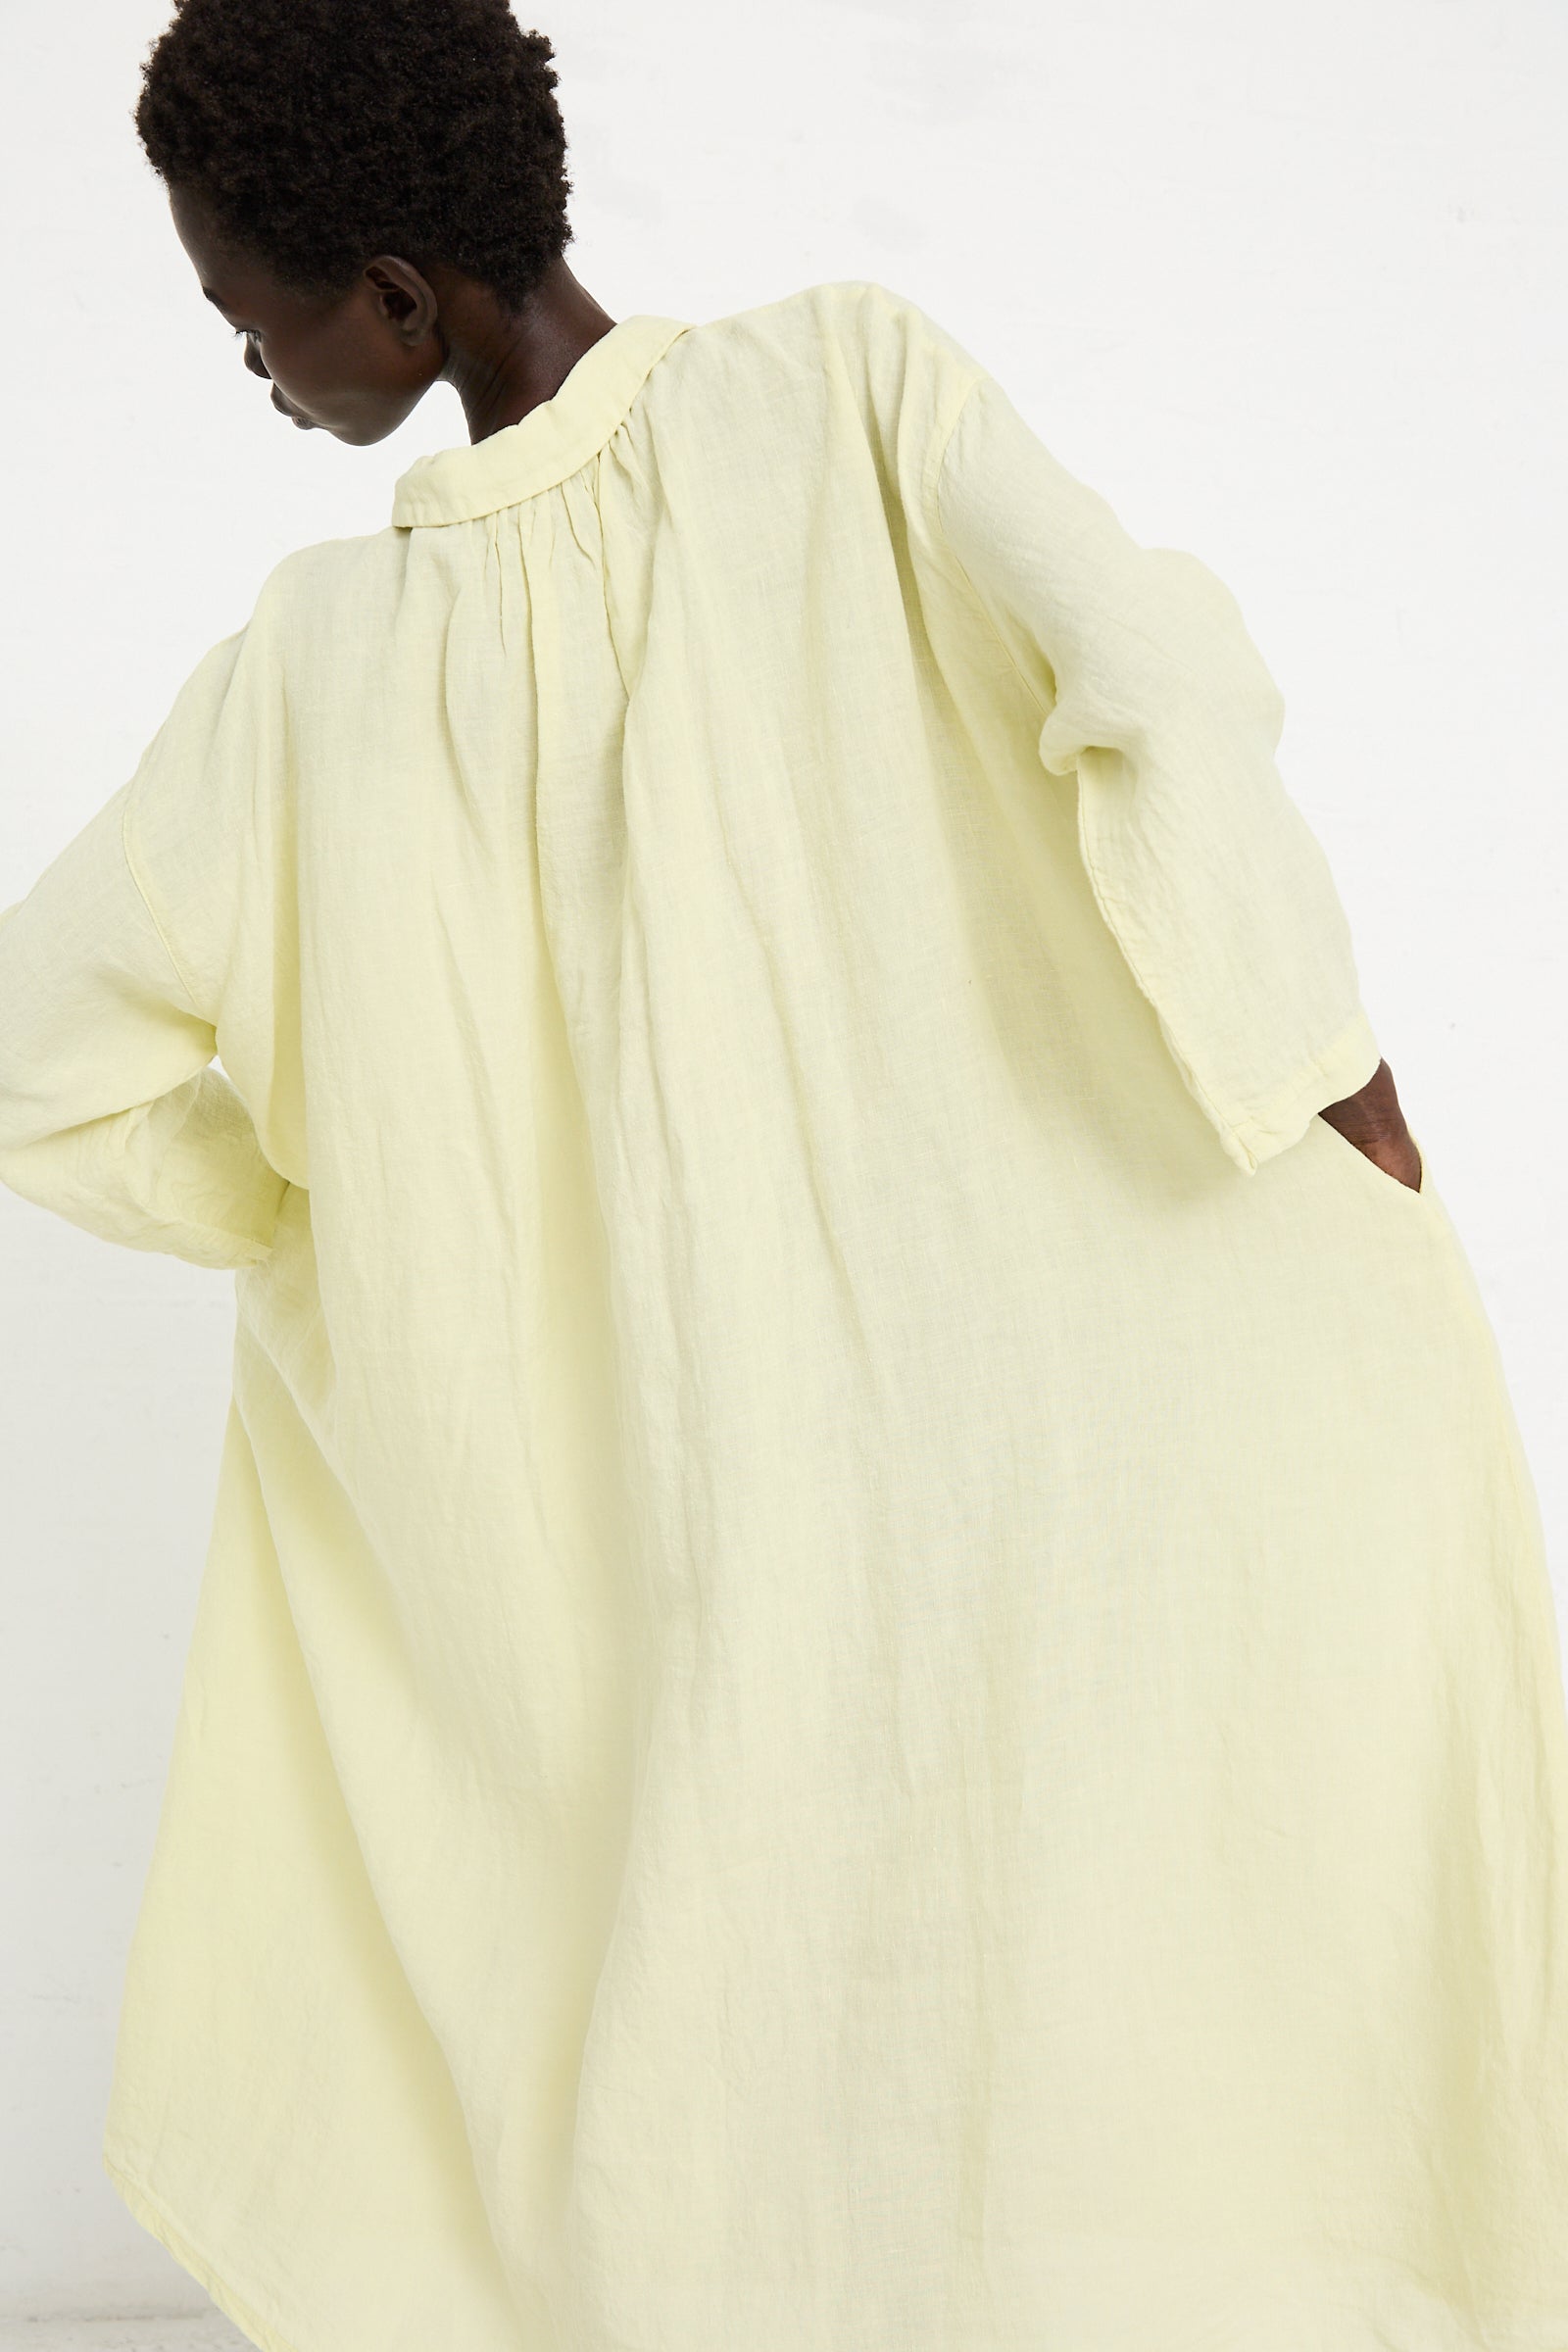 Person wearing a loose-fitting, light yellow textured **Linen Omi-Zarashi Shirt Dress in Lemon** by **nest Robe**, pictured from the back and slightly turned to the side, standing against a plain white background.